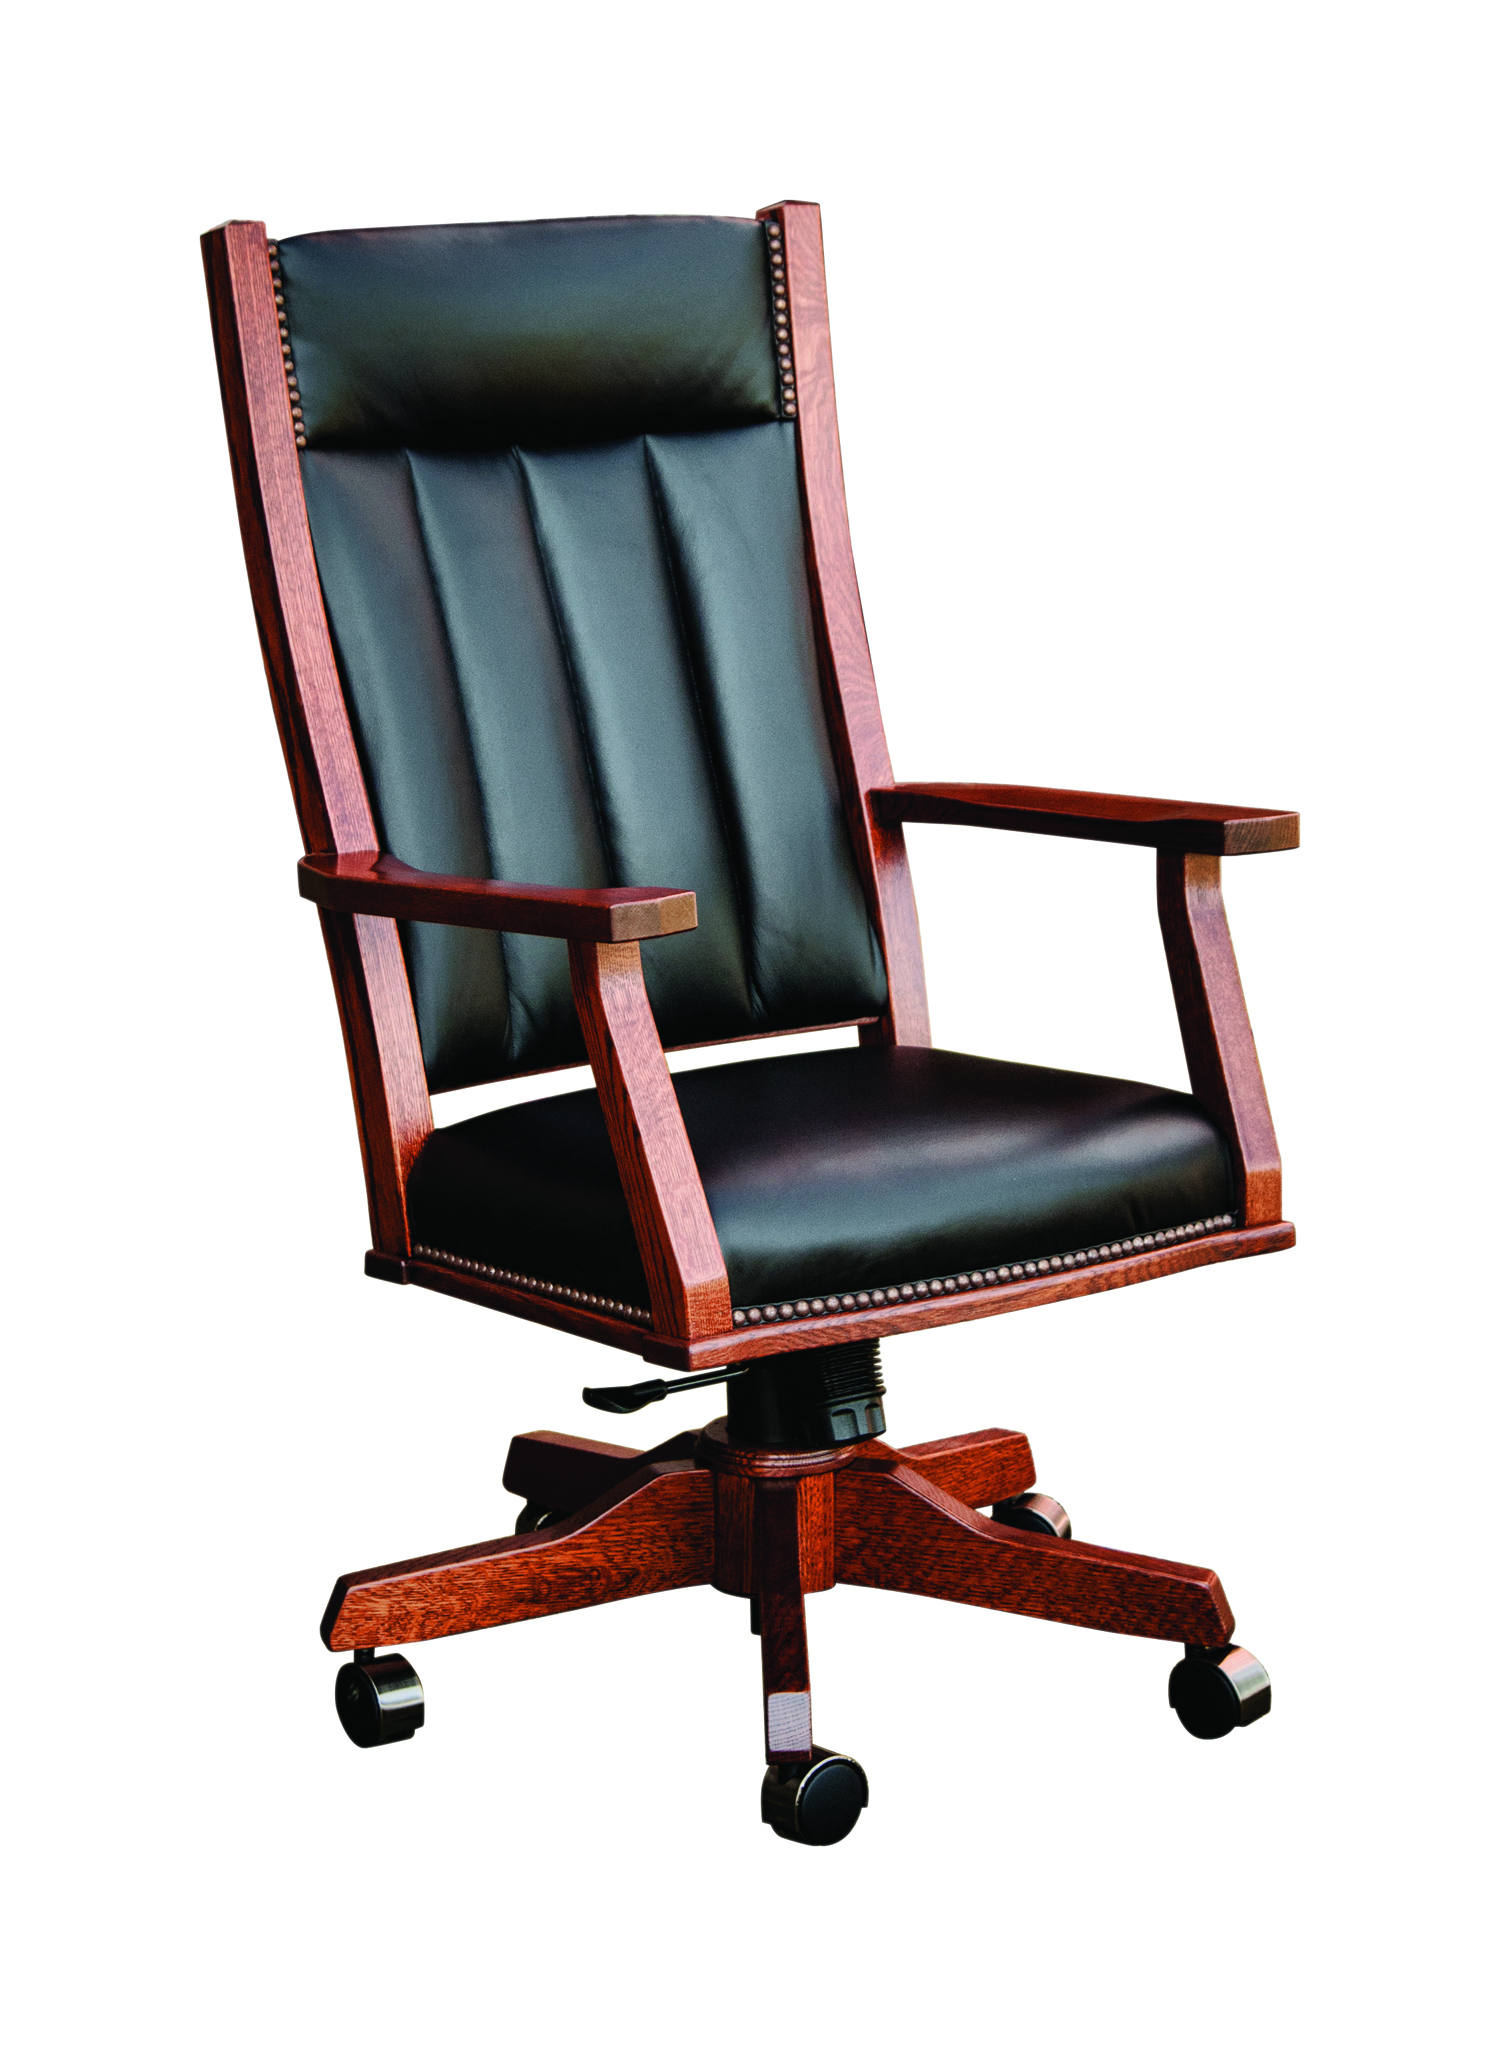 Mission Style Desk Chair Gallery Augusta